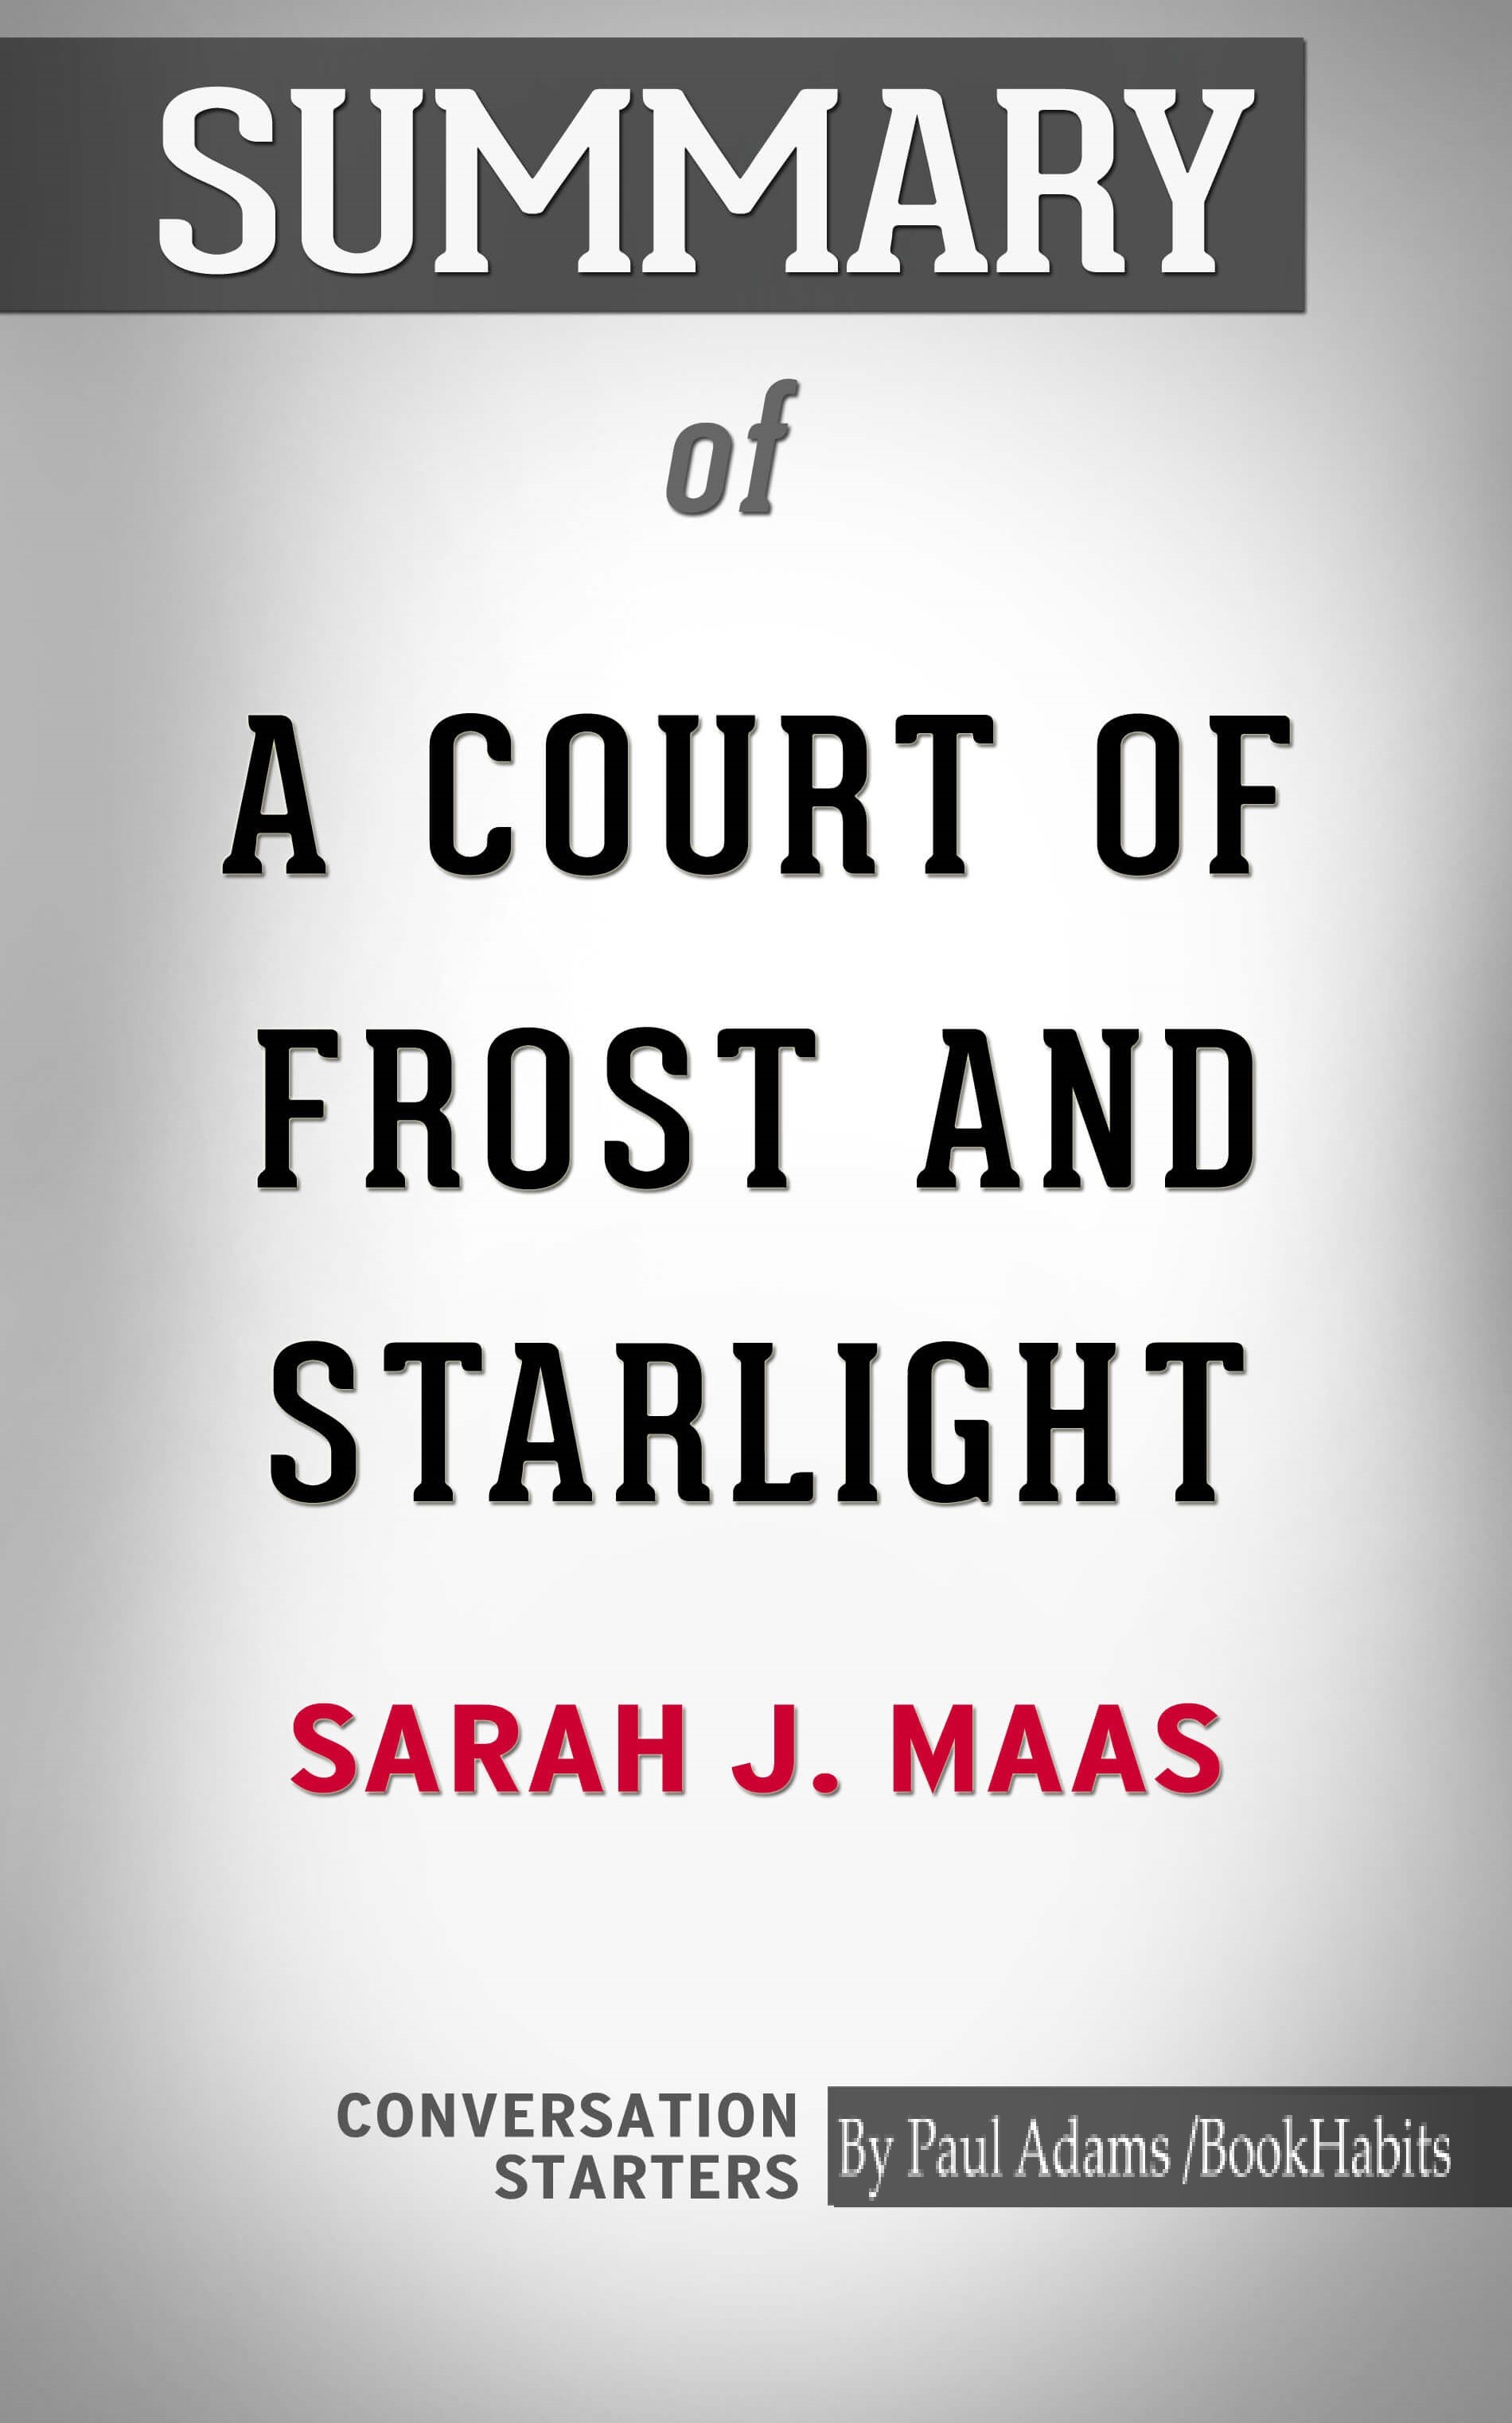 Summary of A Court of Frost and Starlight